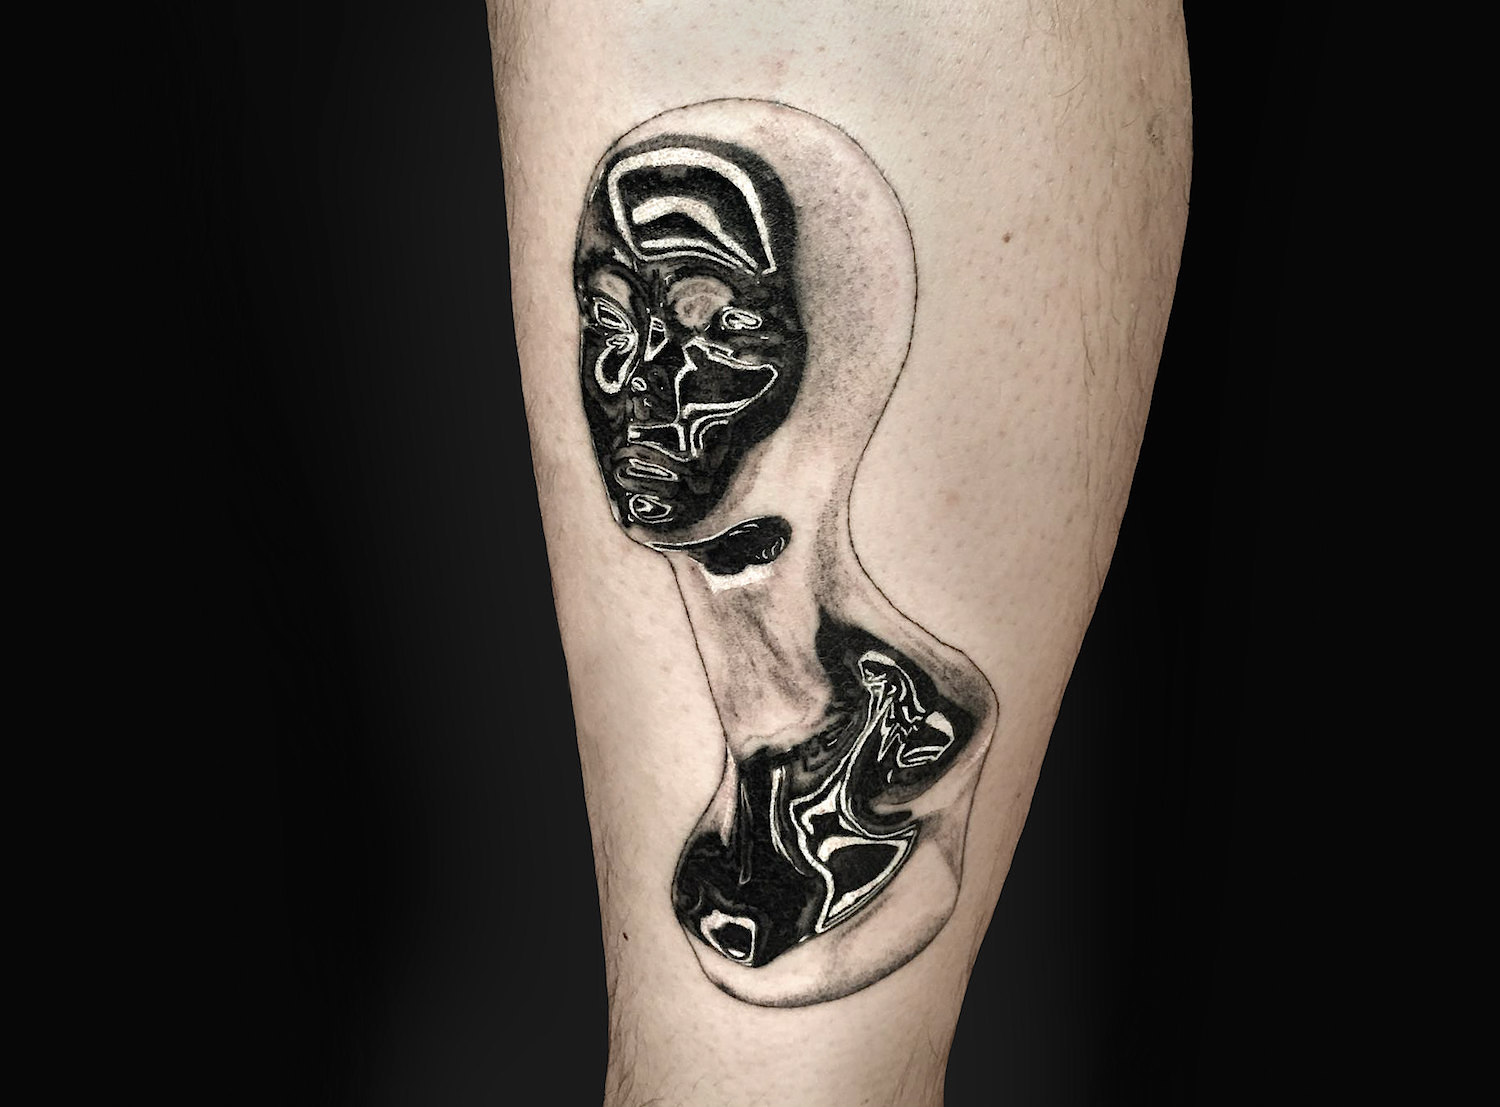 Single needle chrome mannequin tattoo by Shannon Perry